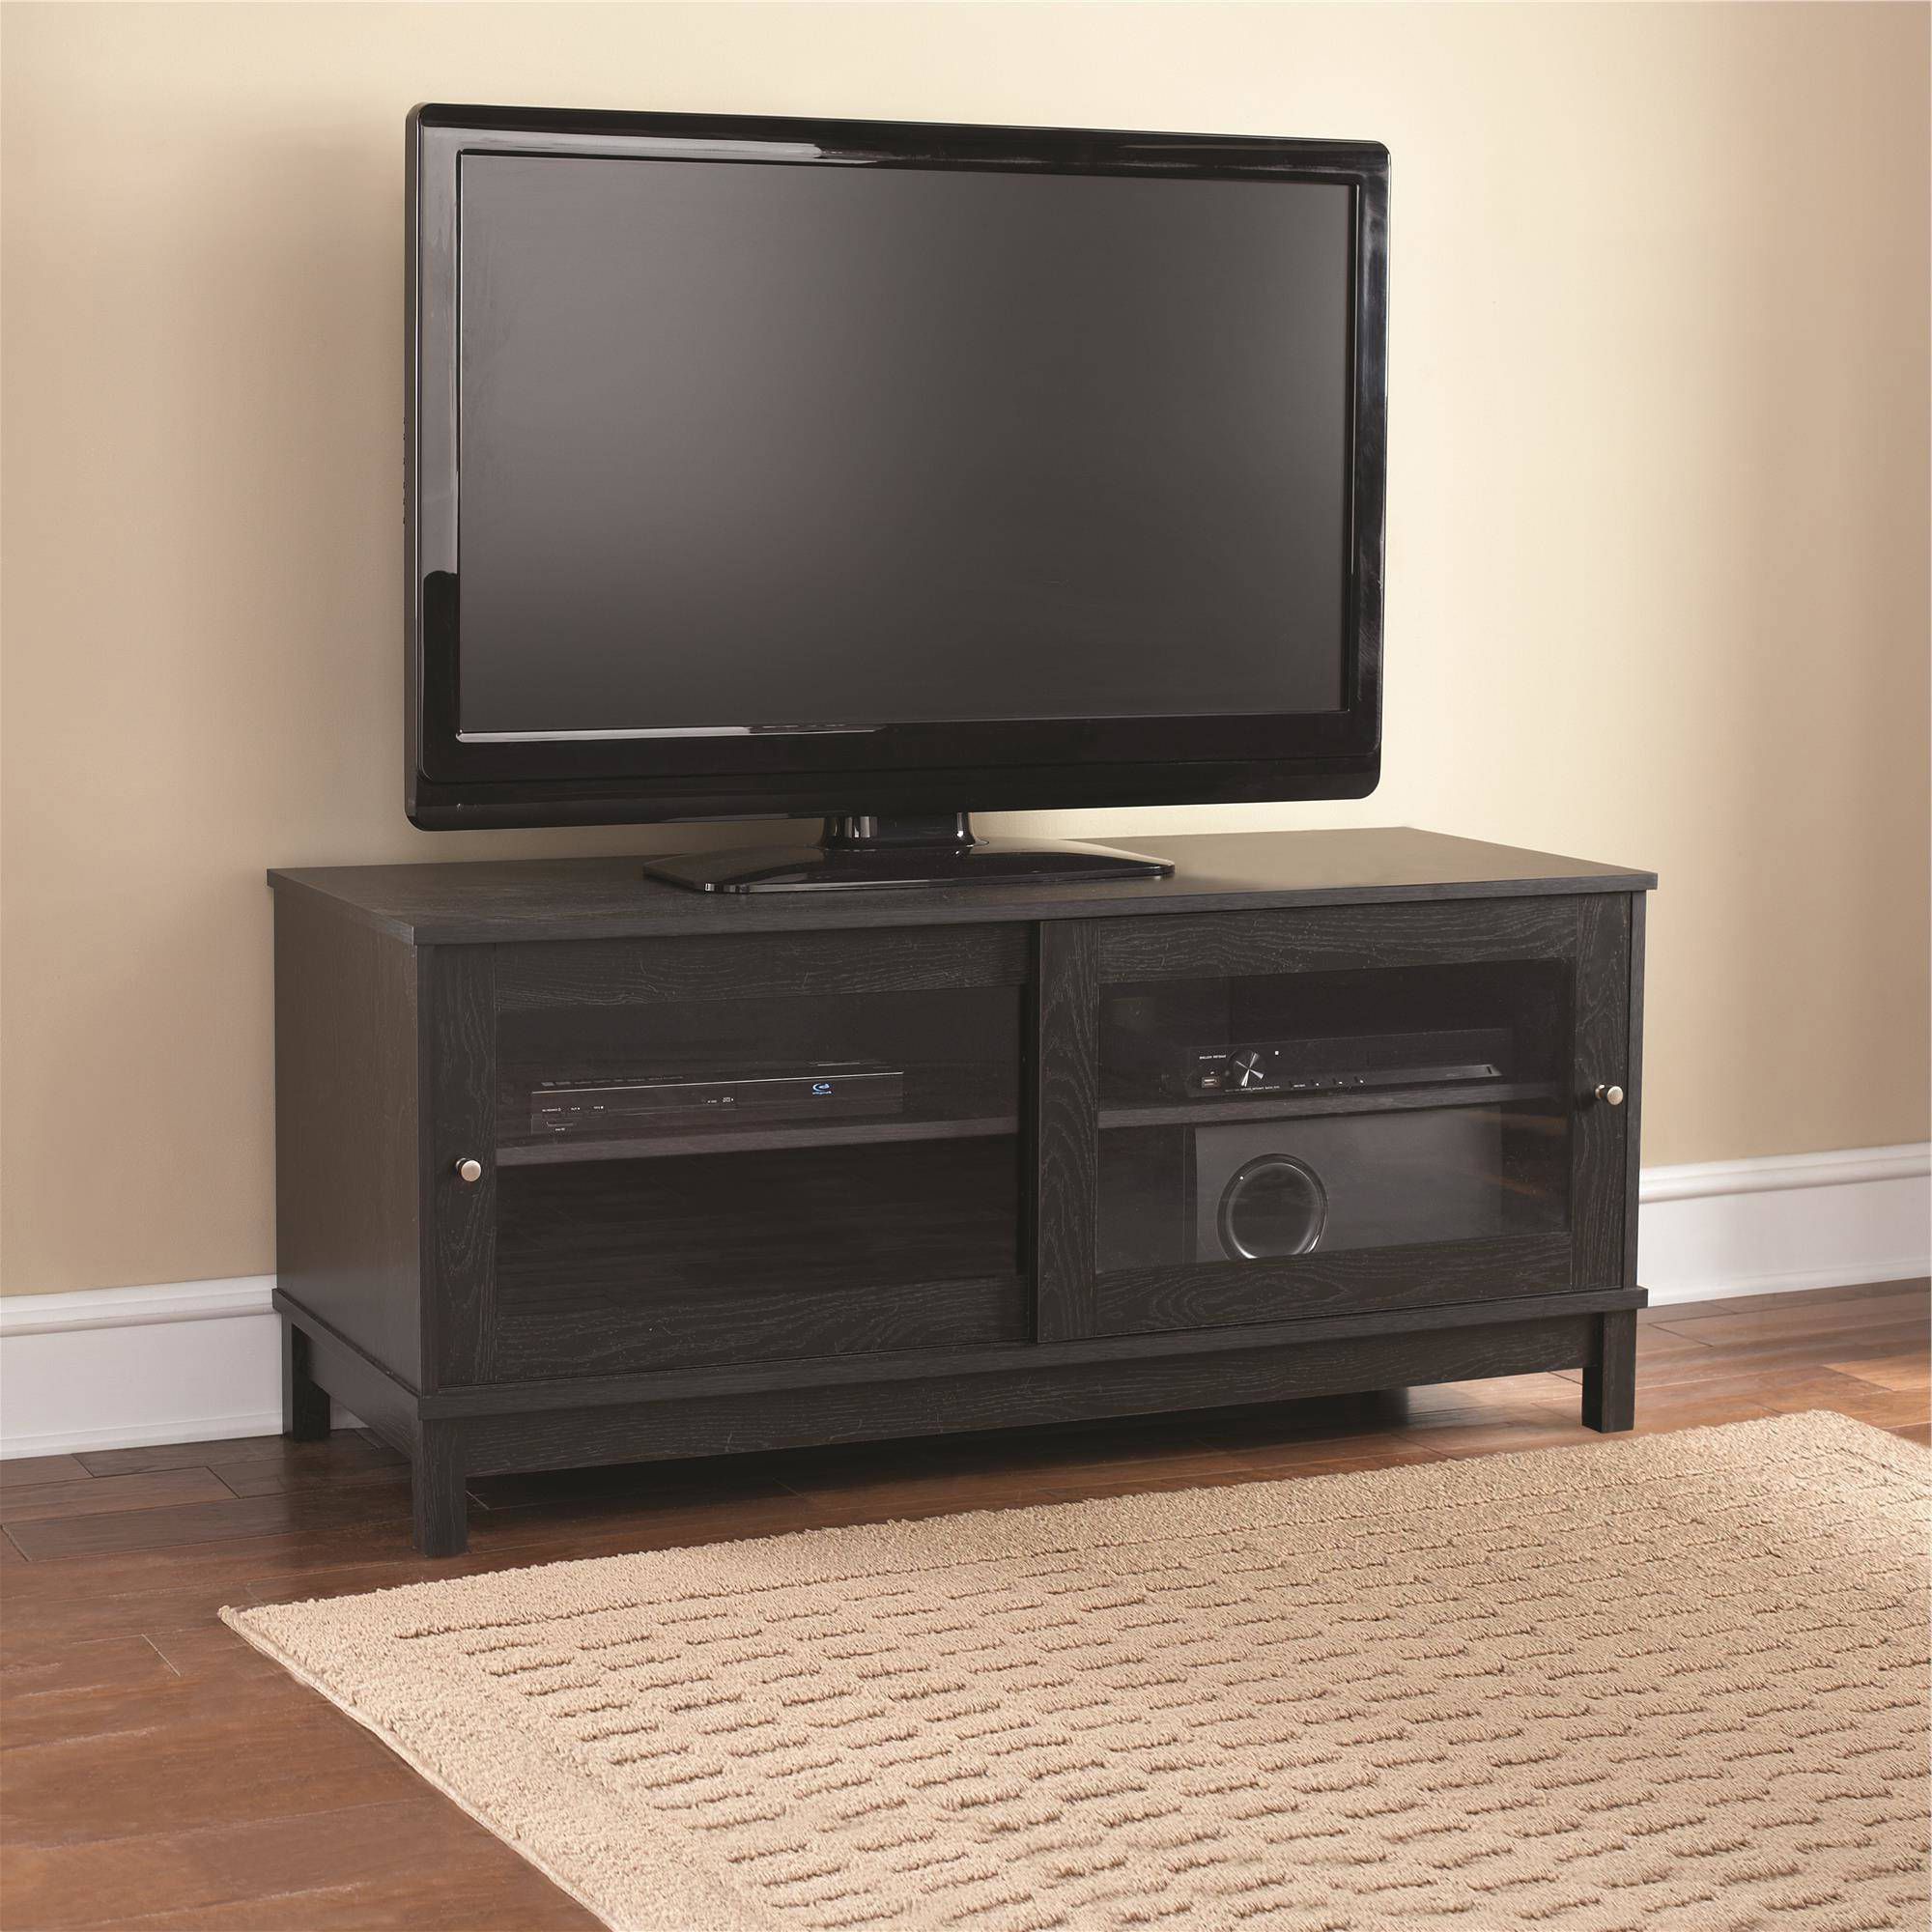 Popular Mainstays 55" Tv Stand With Sliding Glass Doors, Multiple Colors With Regard To Contemporary Glass Tv Stands (Photo 9 of 20)